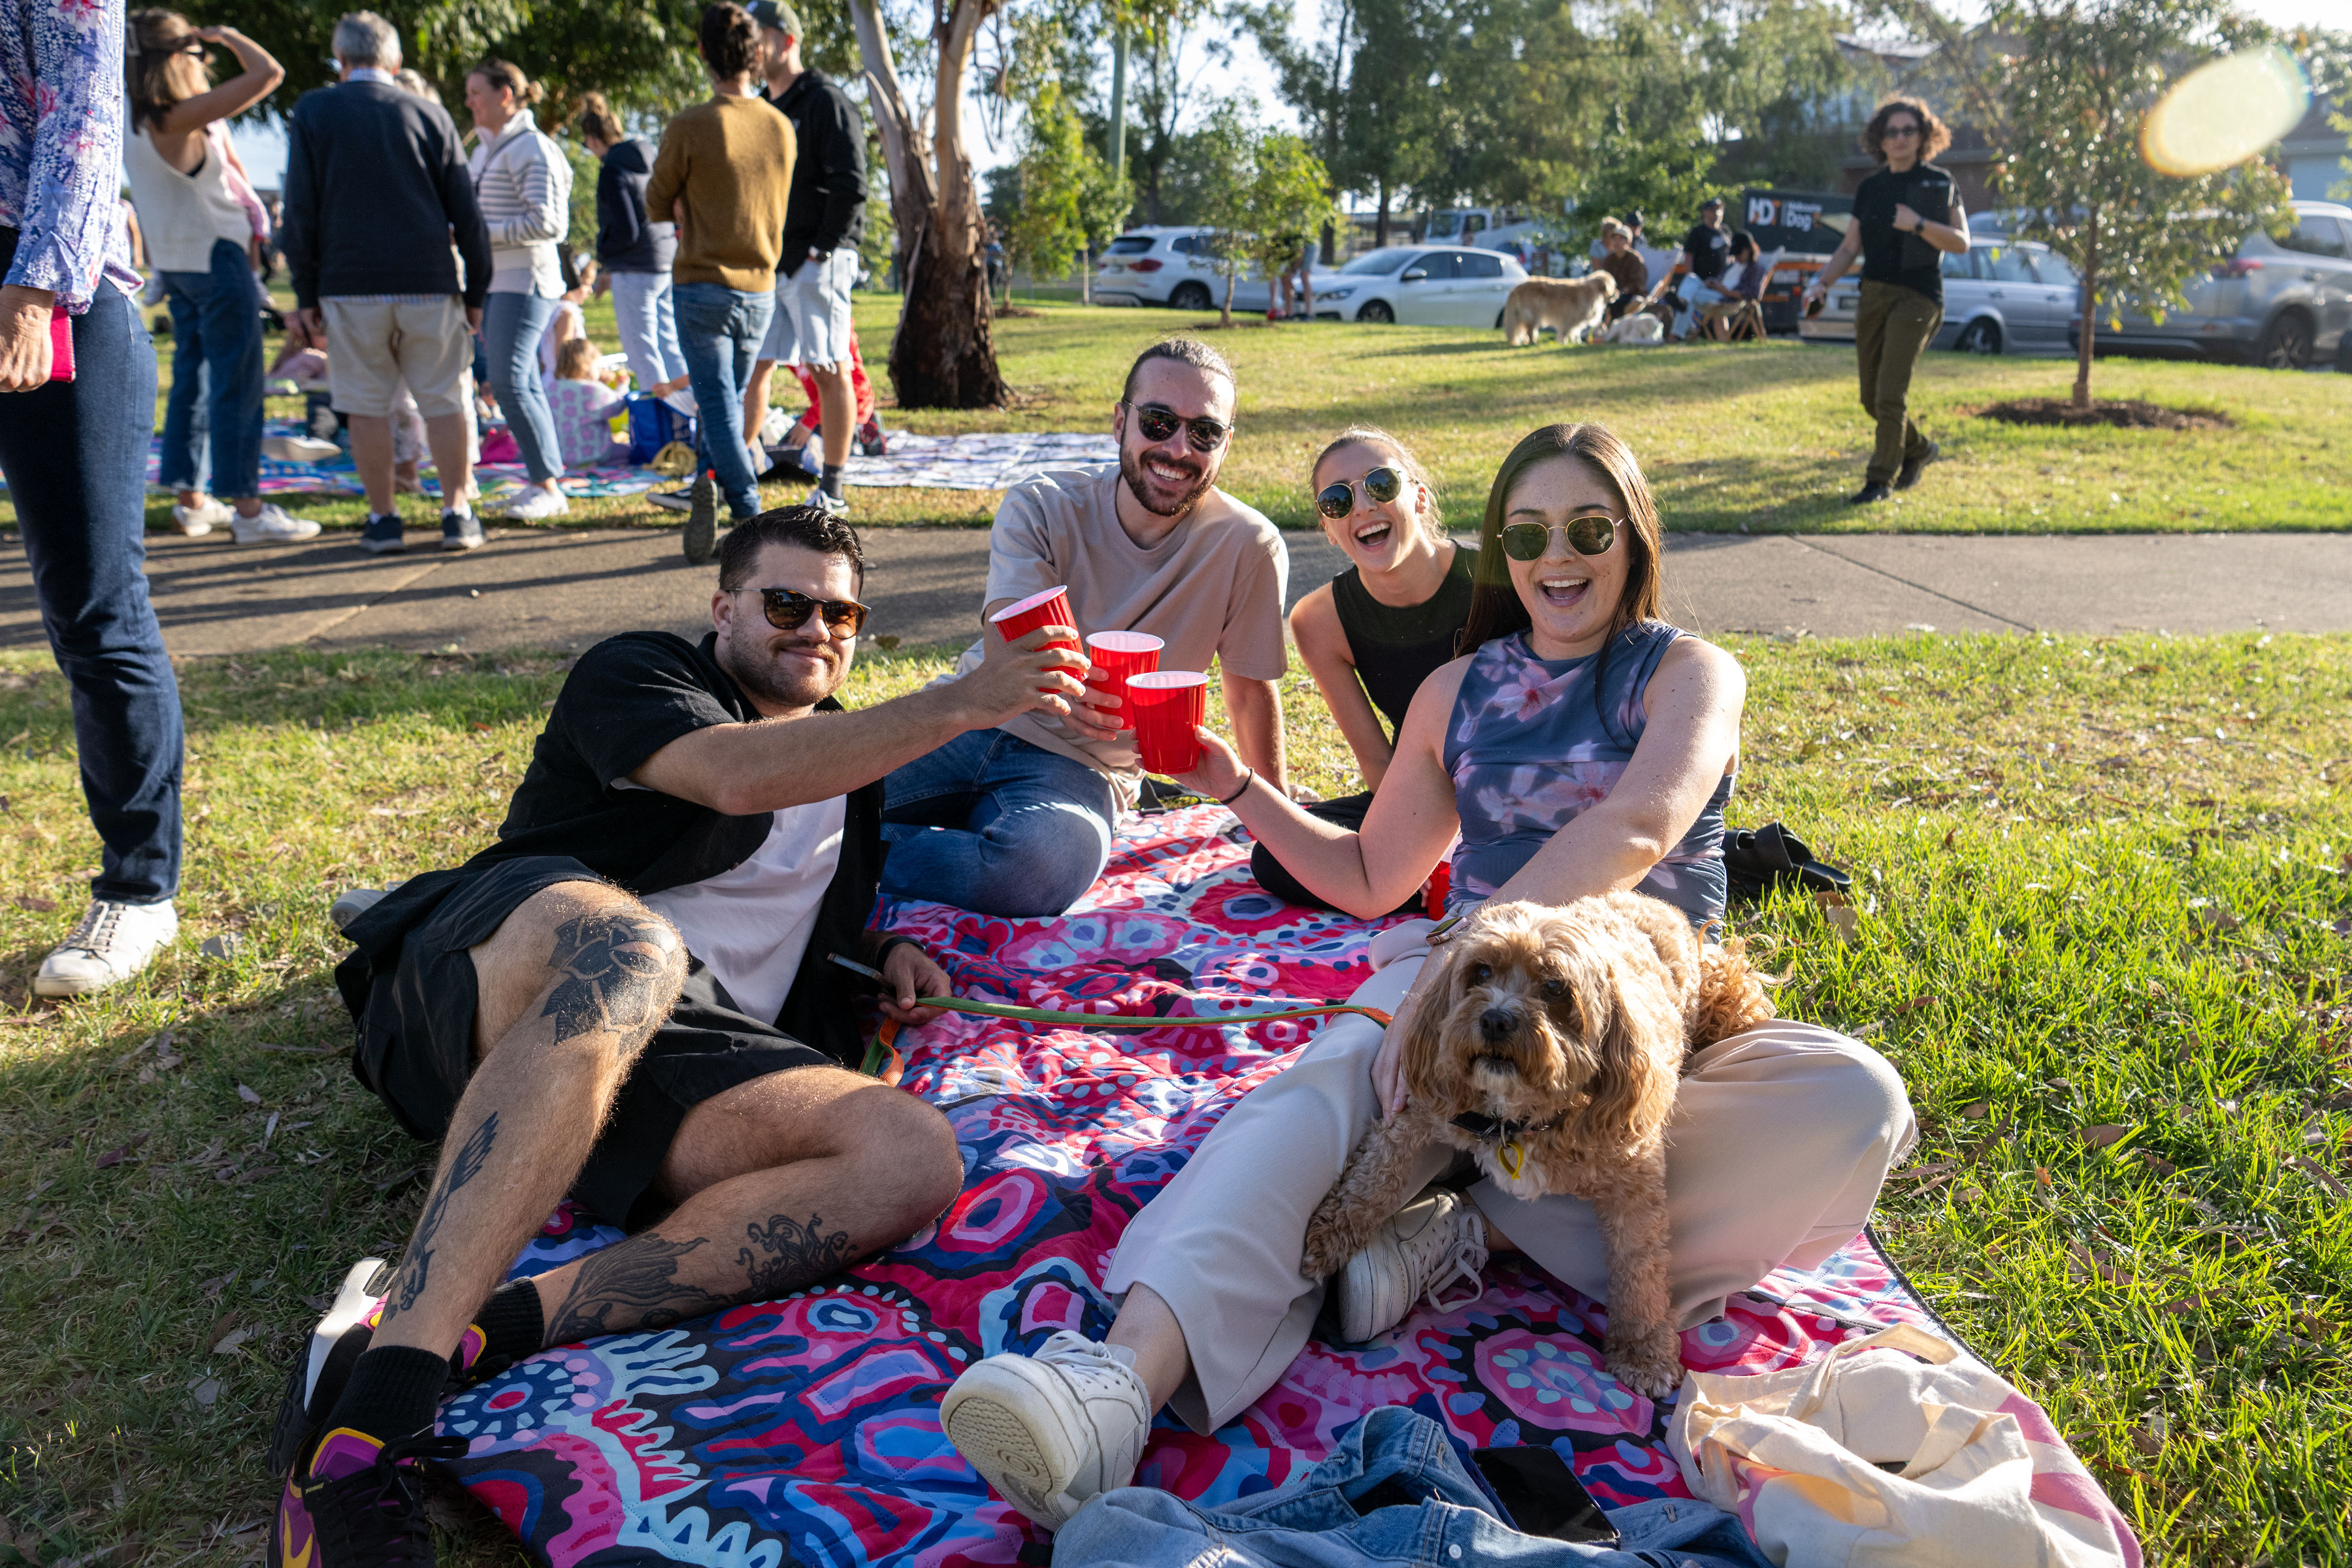 Group of people smiling on picnic rug with dog